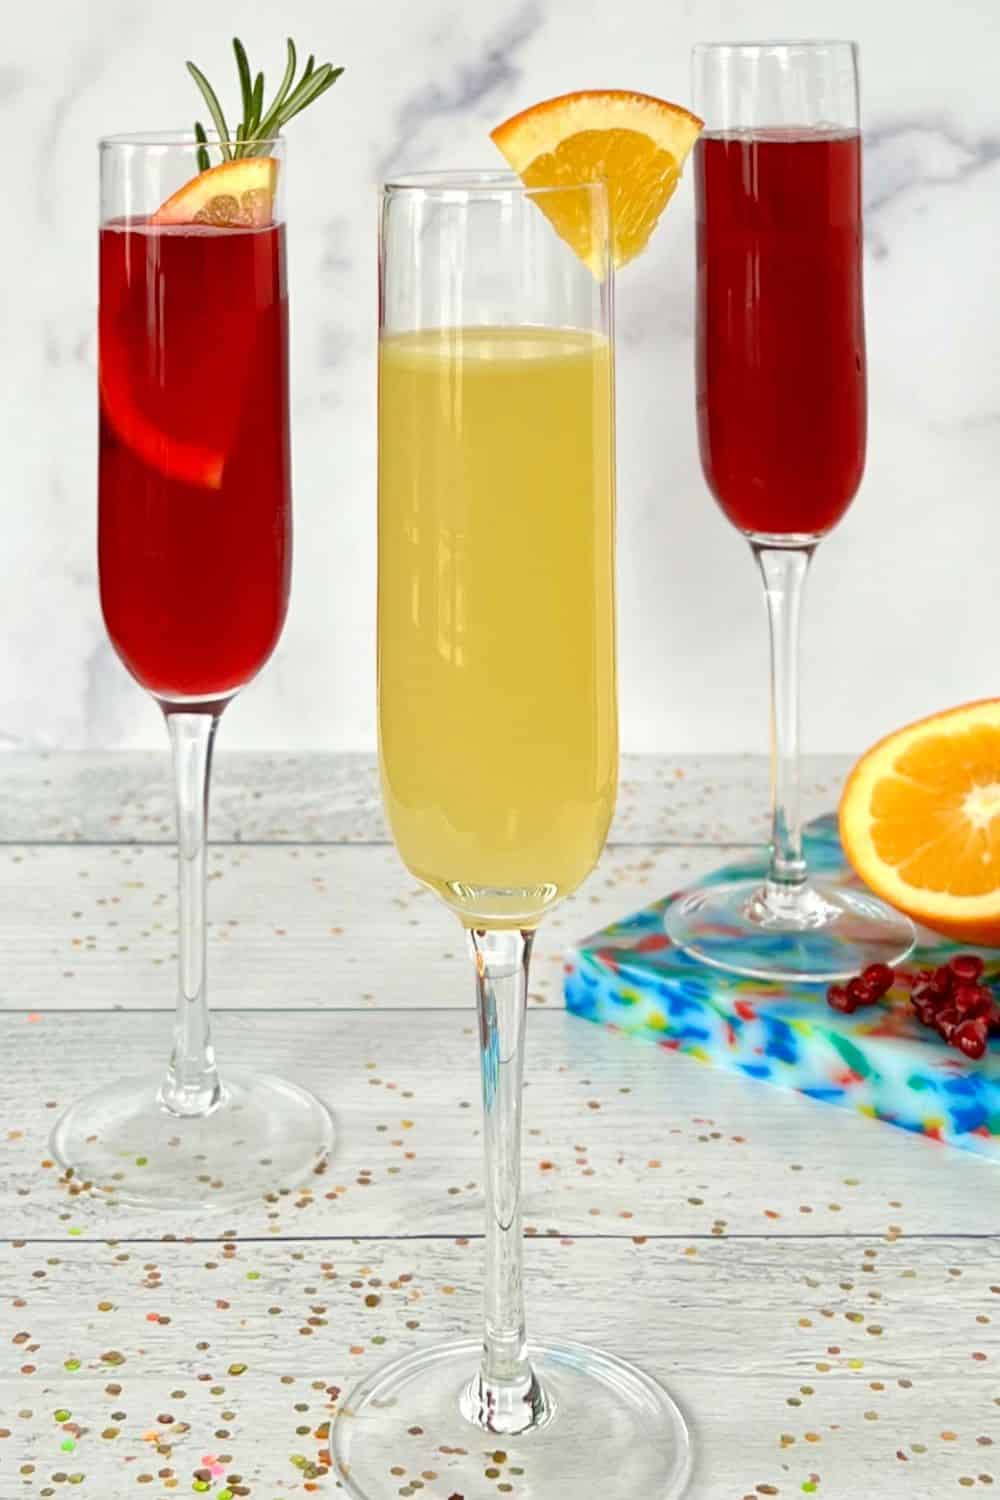 Three healthy mocktails in champagne flutes on a white table covered in glitter.